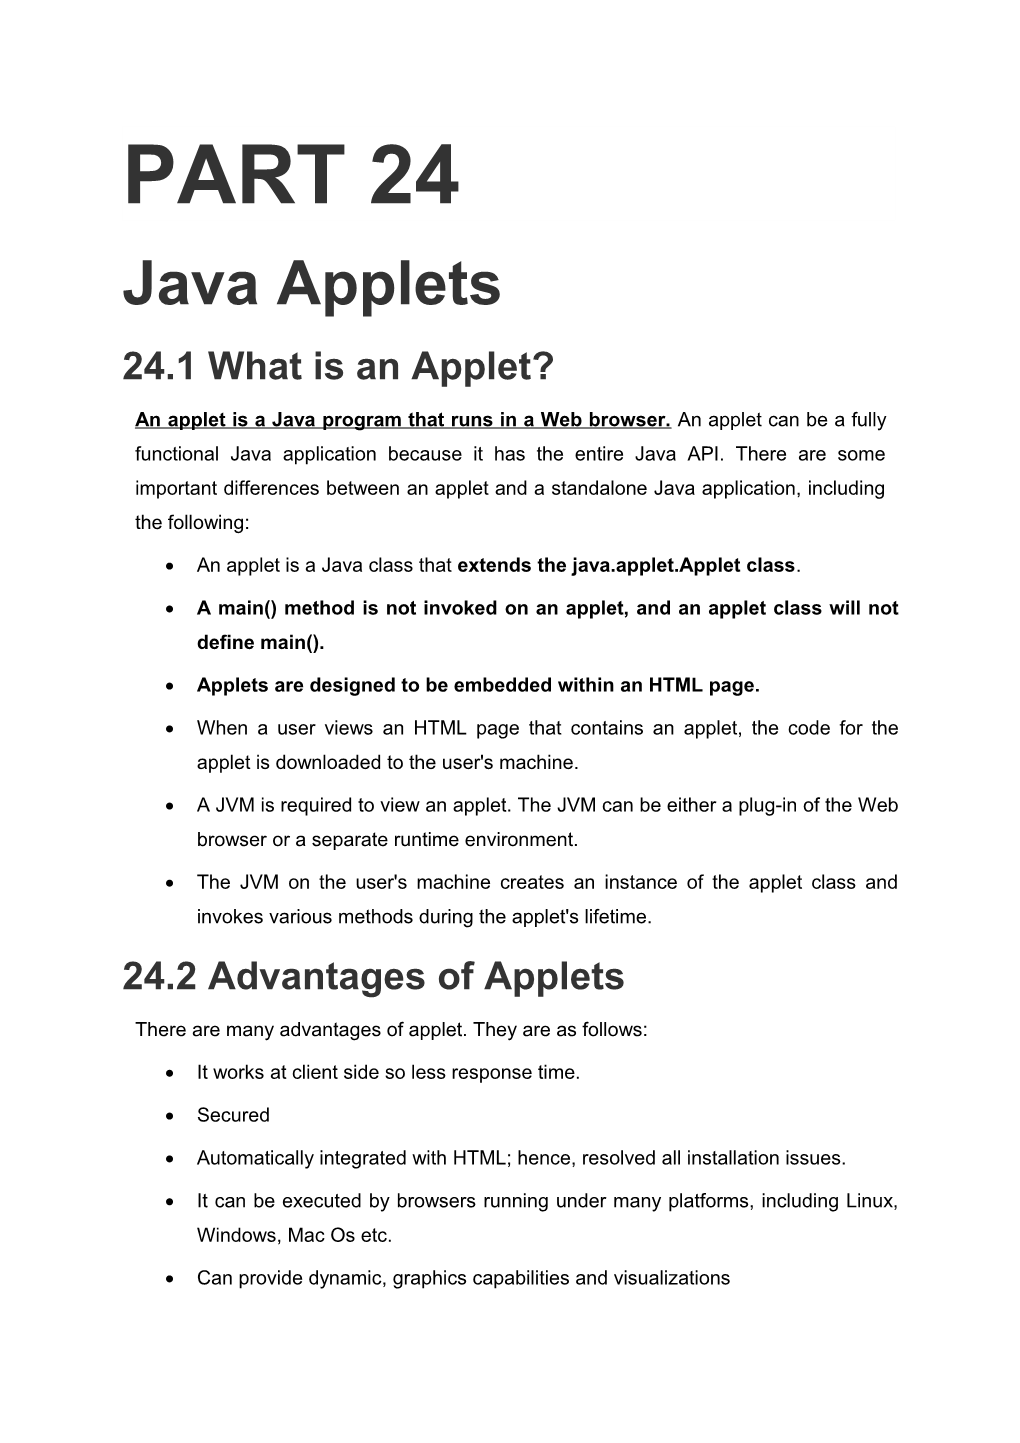 24.1 What Is an Applet?